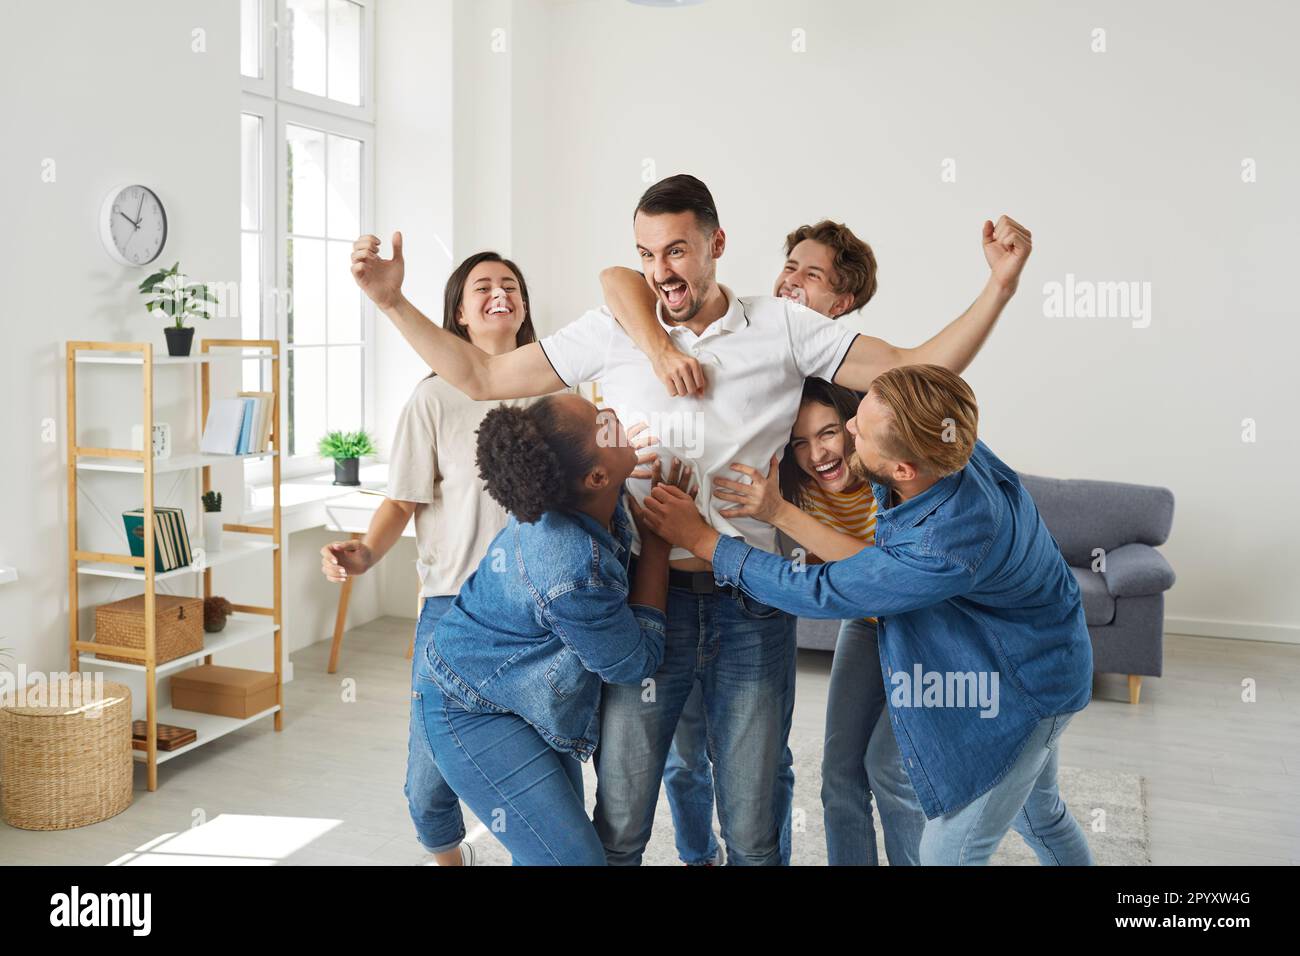 Group of excited young people congratulate friend man who's achieved great success. Stock Photo